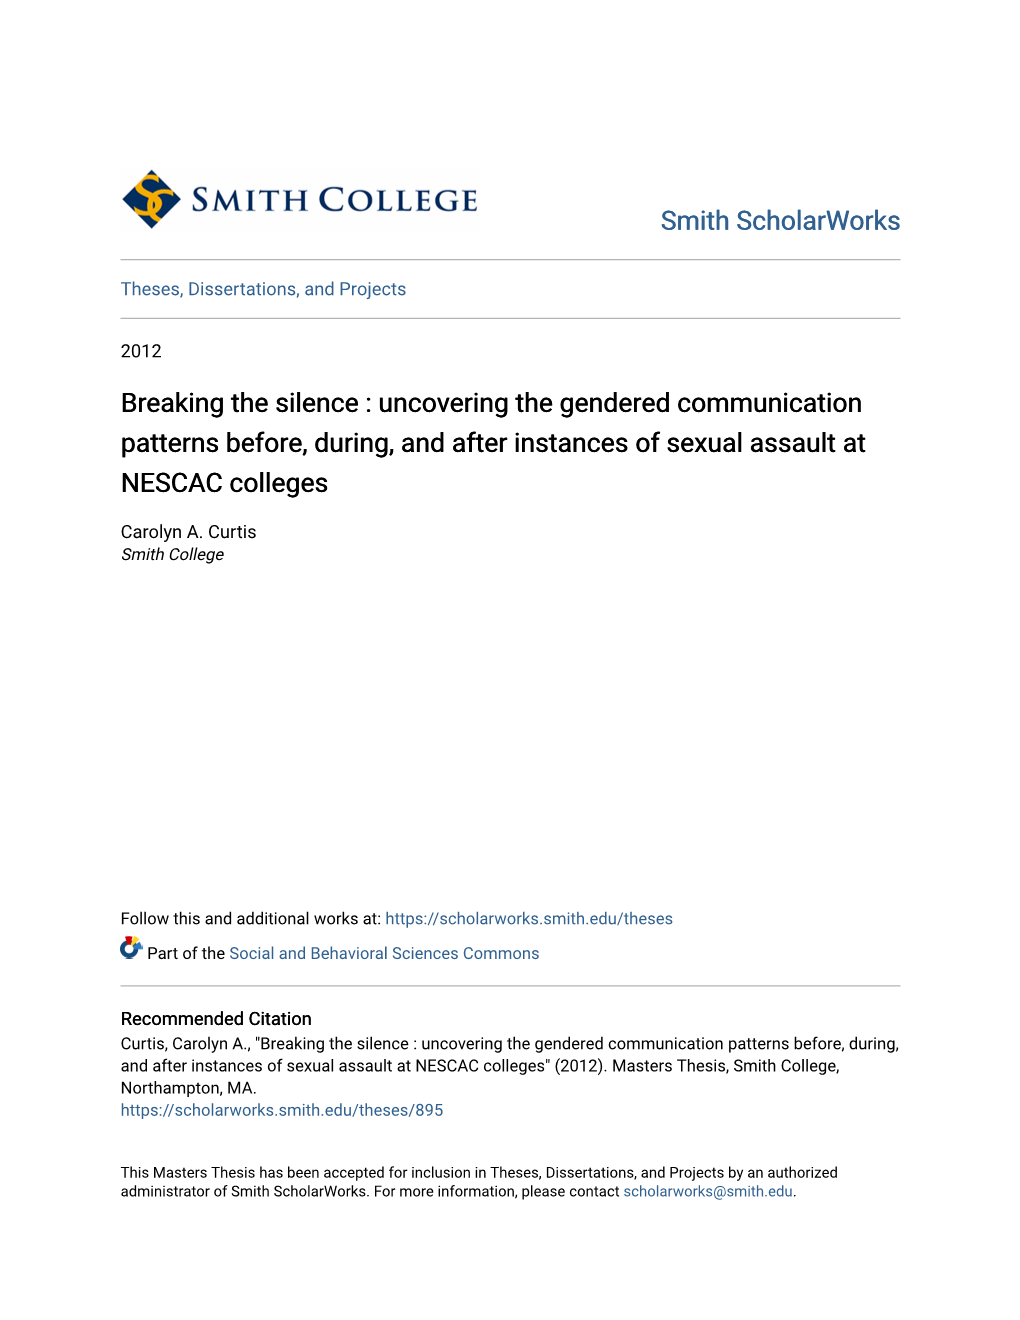 Breaking the Silence : Uncovering the Gendered Communication Patterns Before, During, and After Instances of Sexual Assault at NESCAC Colleges